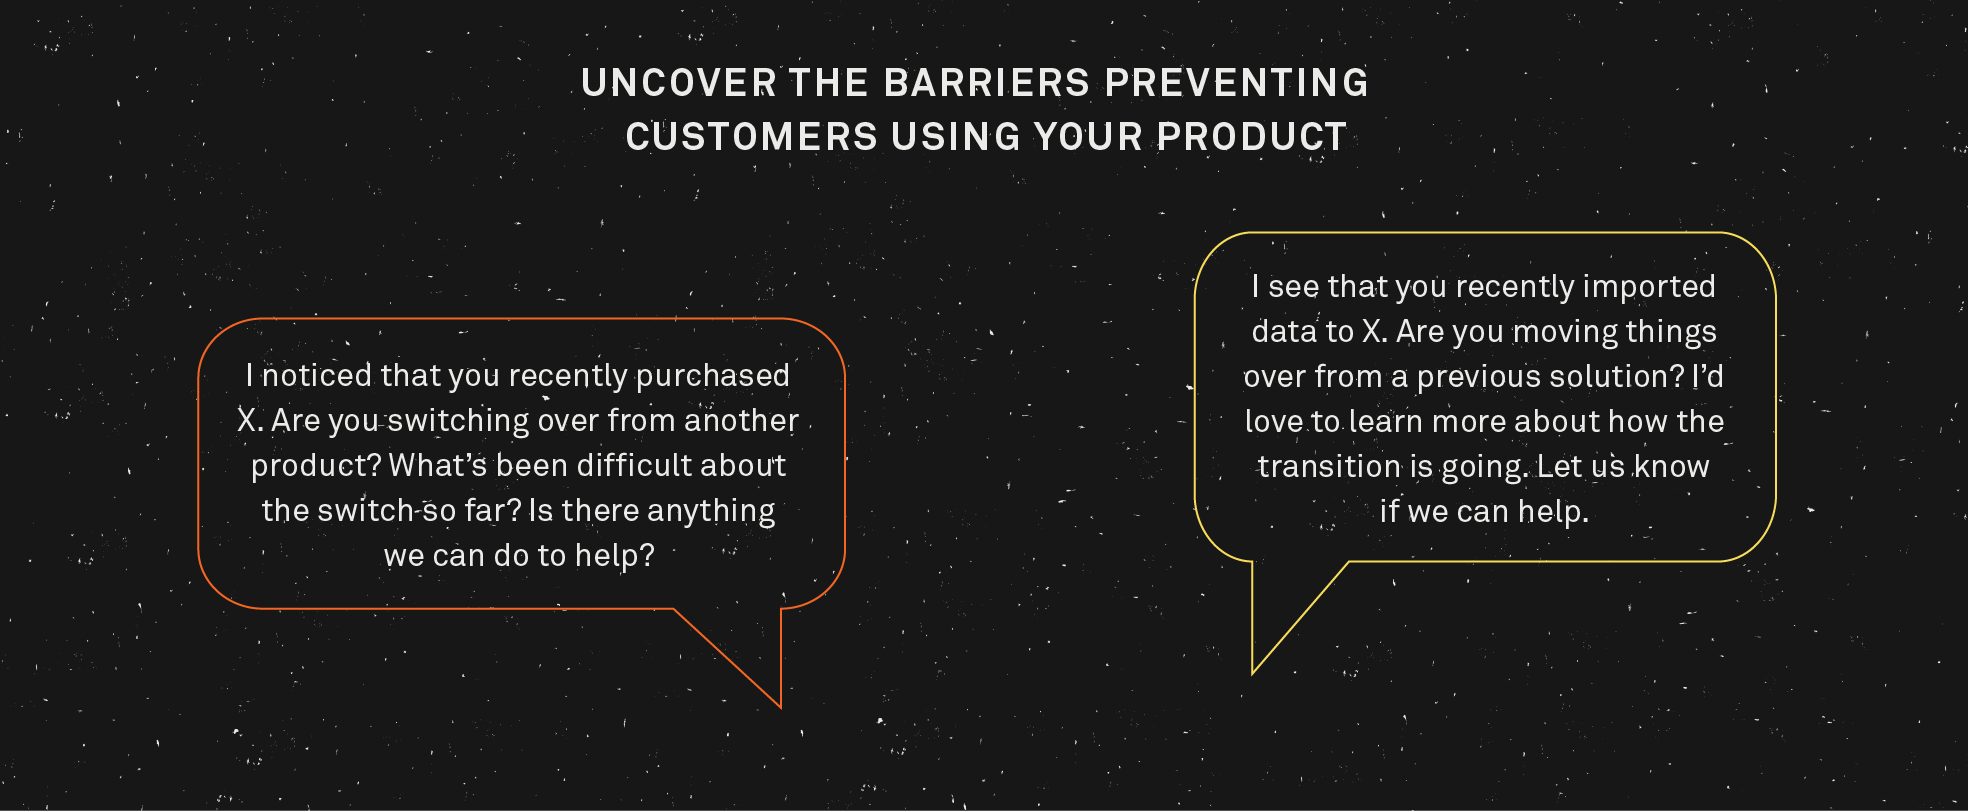 Uncover the barriers preventing customers from using your product